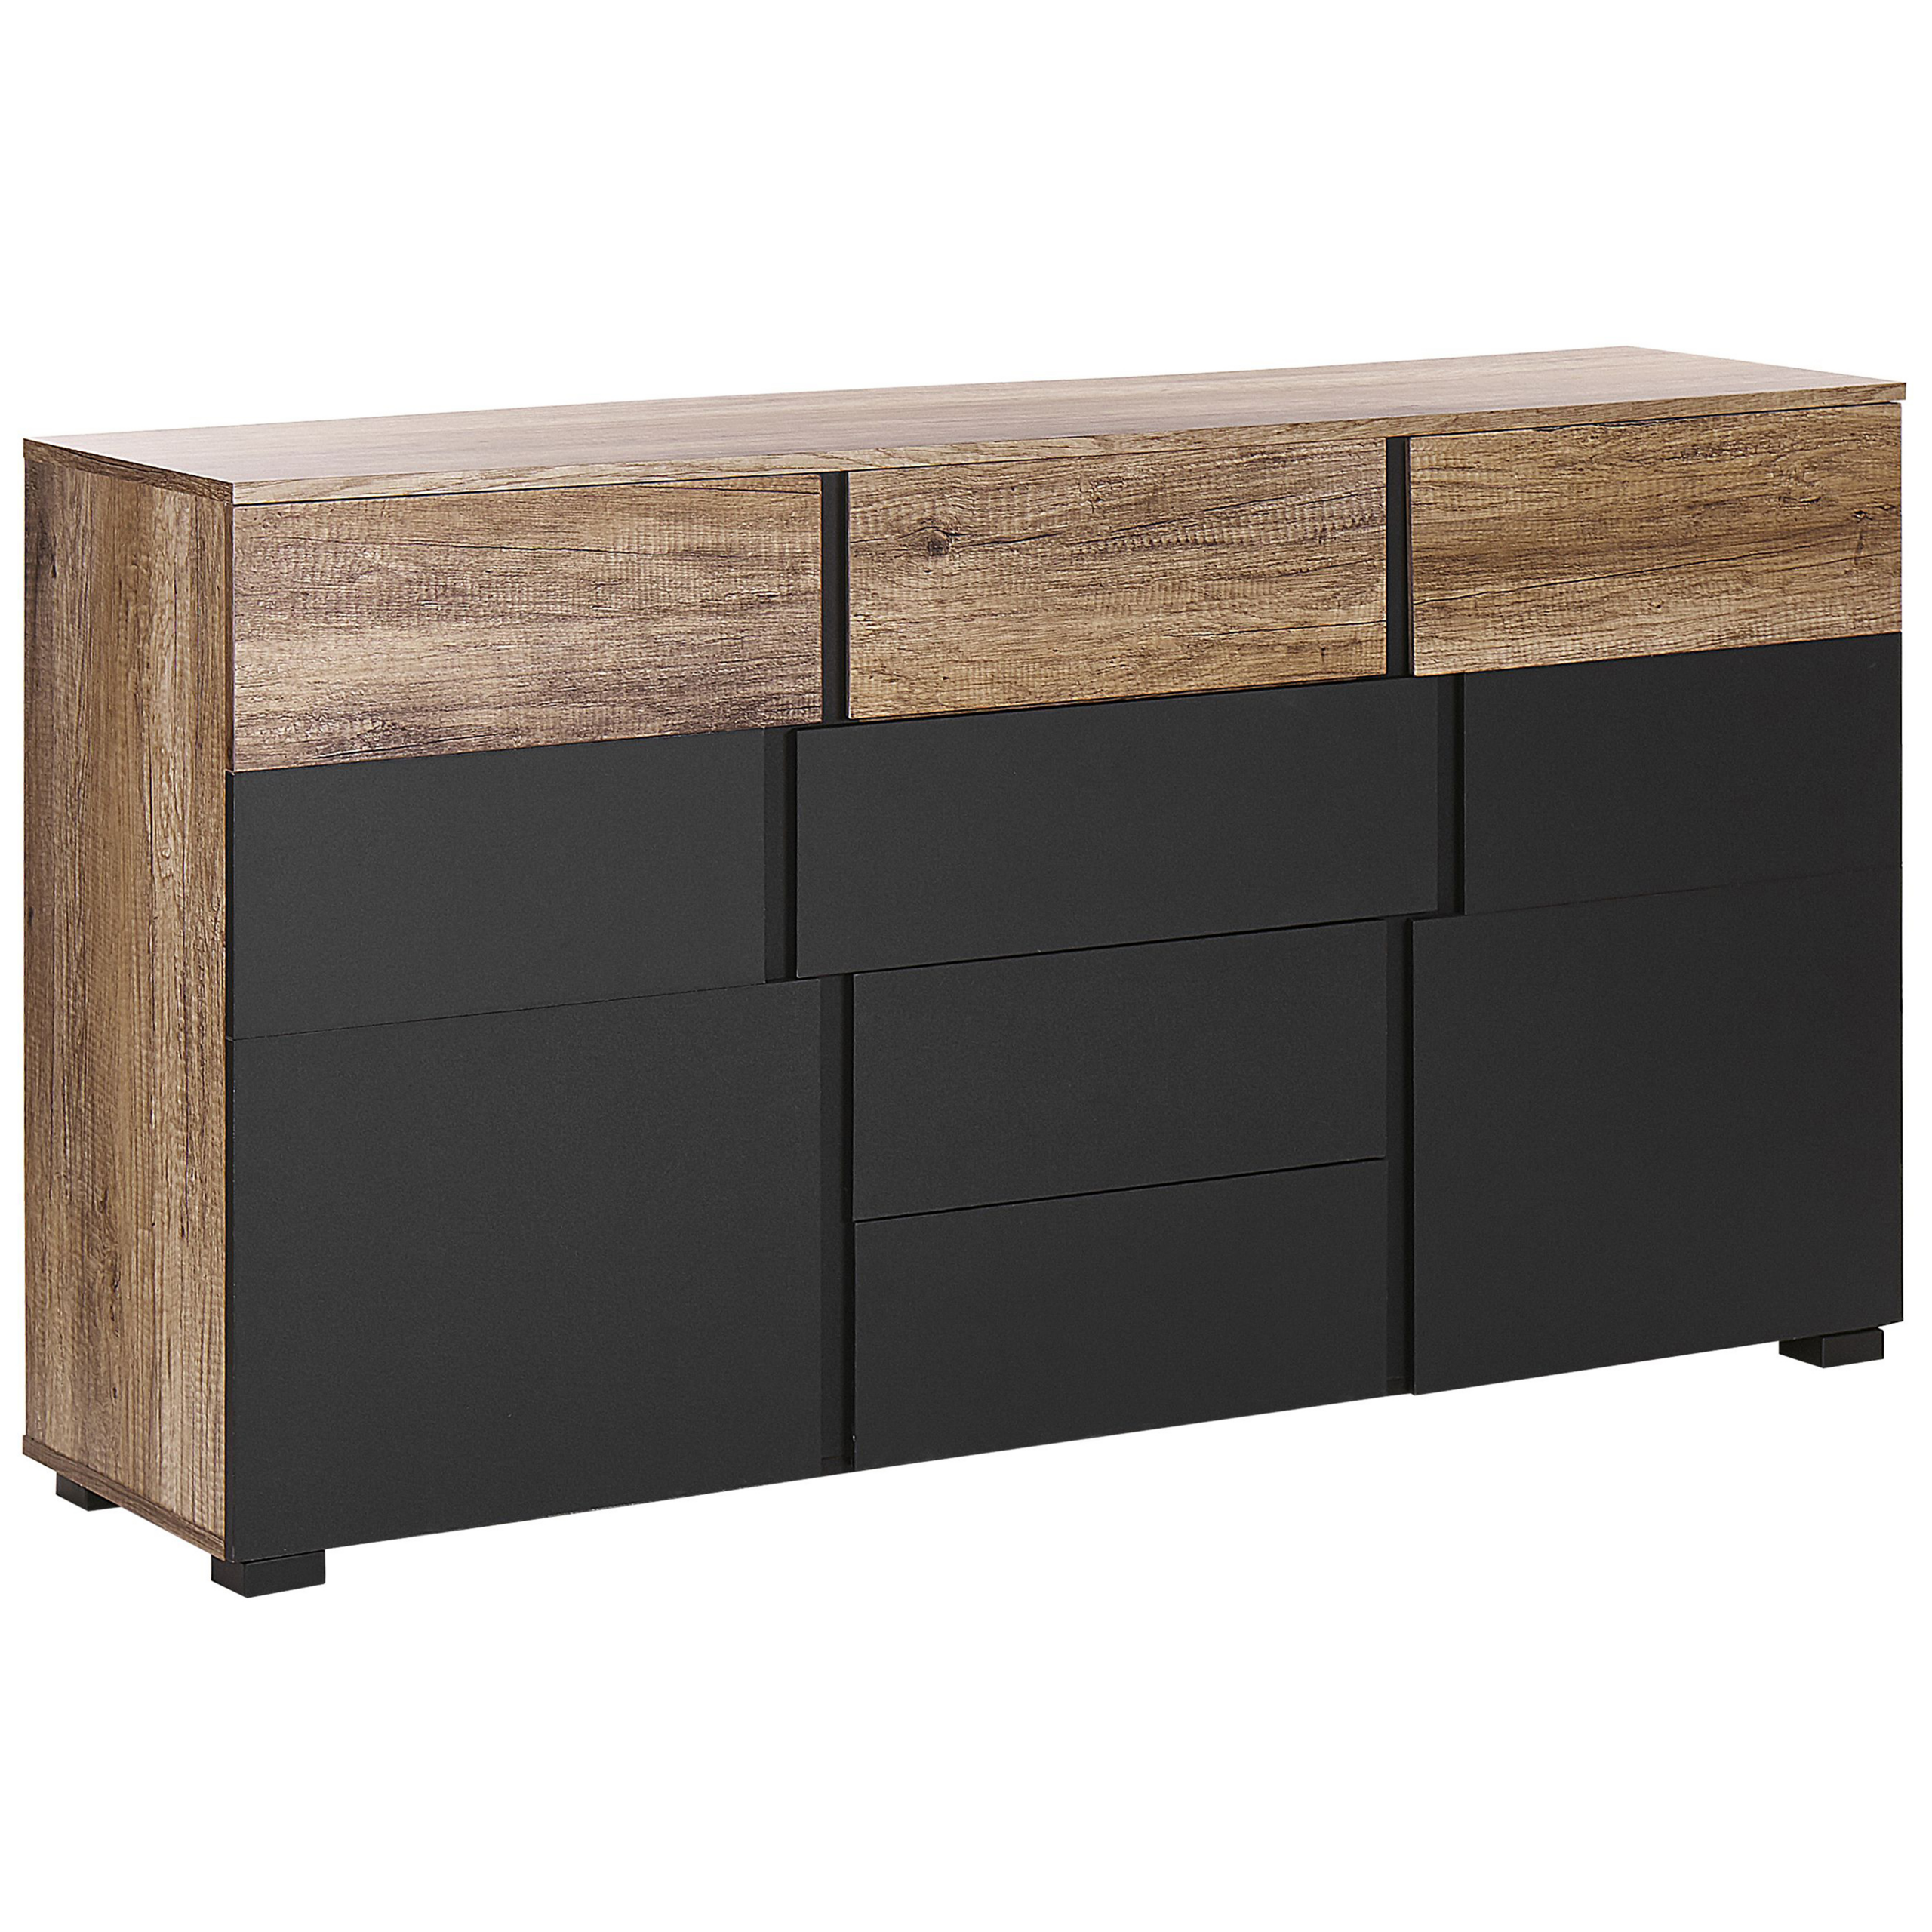 Beliani Sideboard Black Light Wood Particle Board Storage 4 Drawers Doors Cabinets with Shelves Modern Design